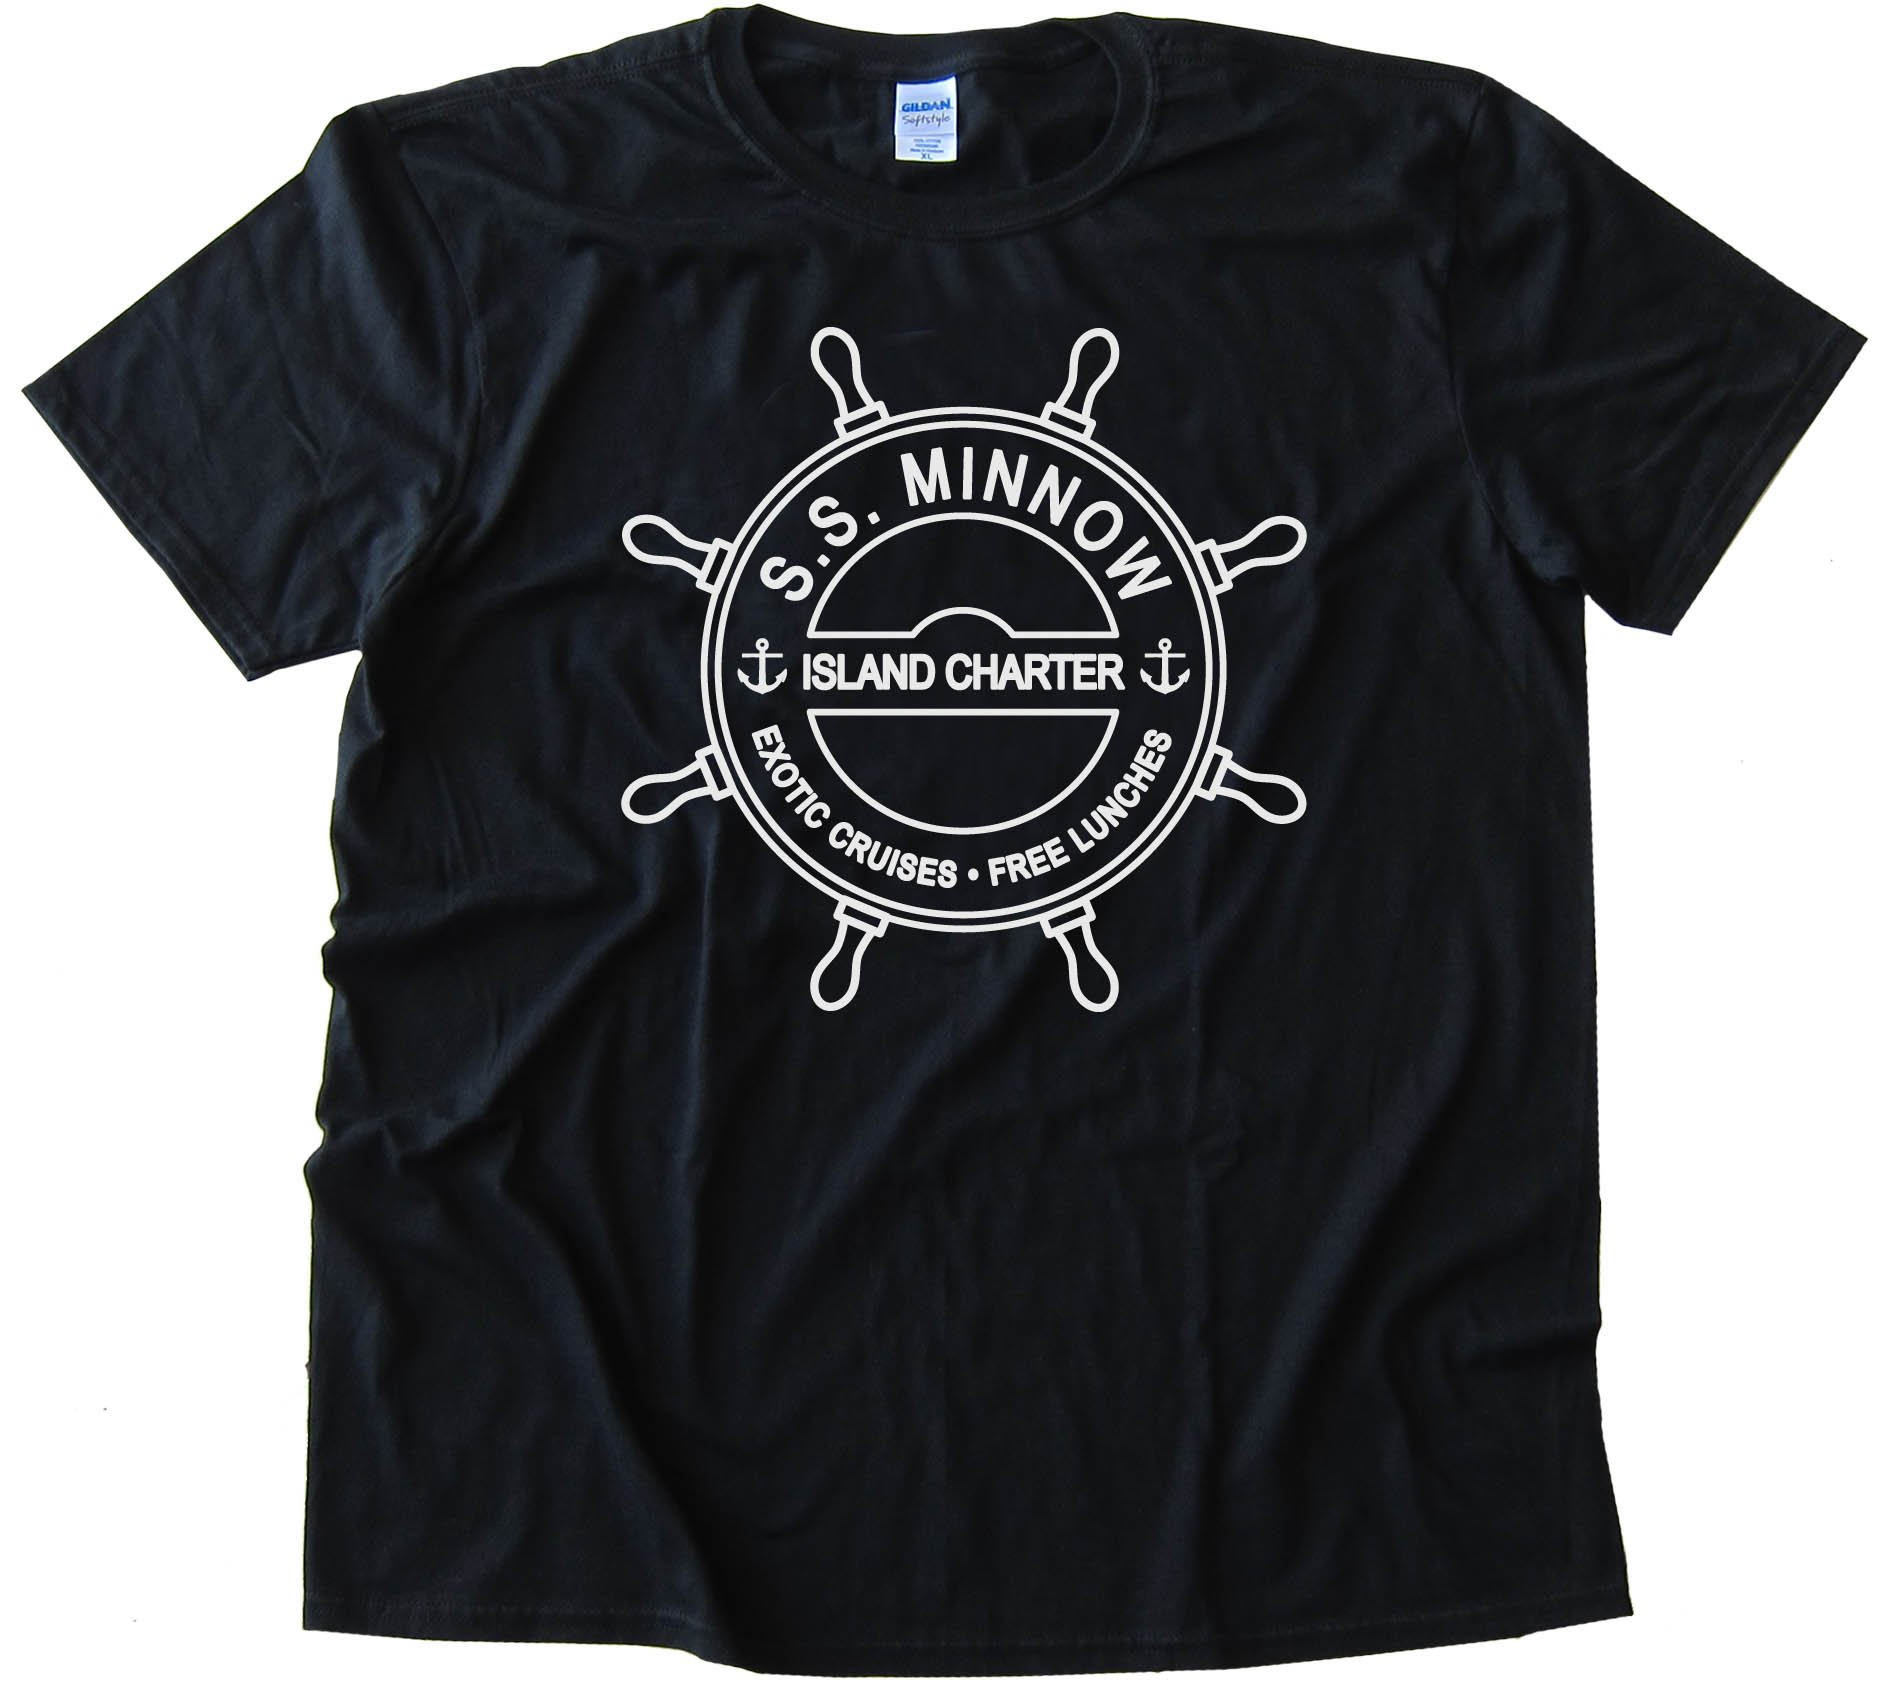 S.S. Minnow Island Charter - Exotic Cruises - Free Lunches - Gilligans Island Sailing -Tee Shirt